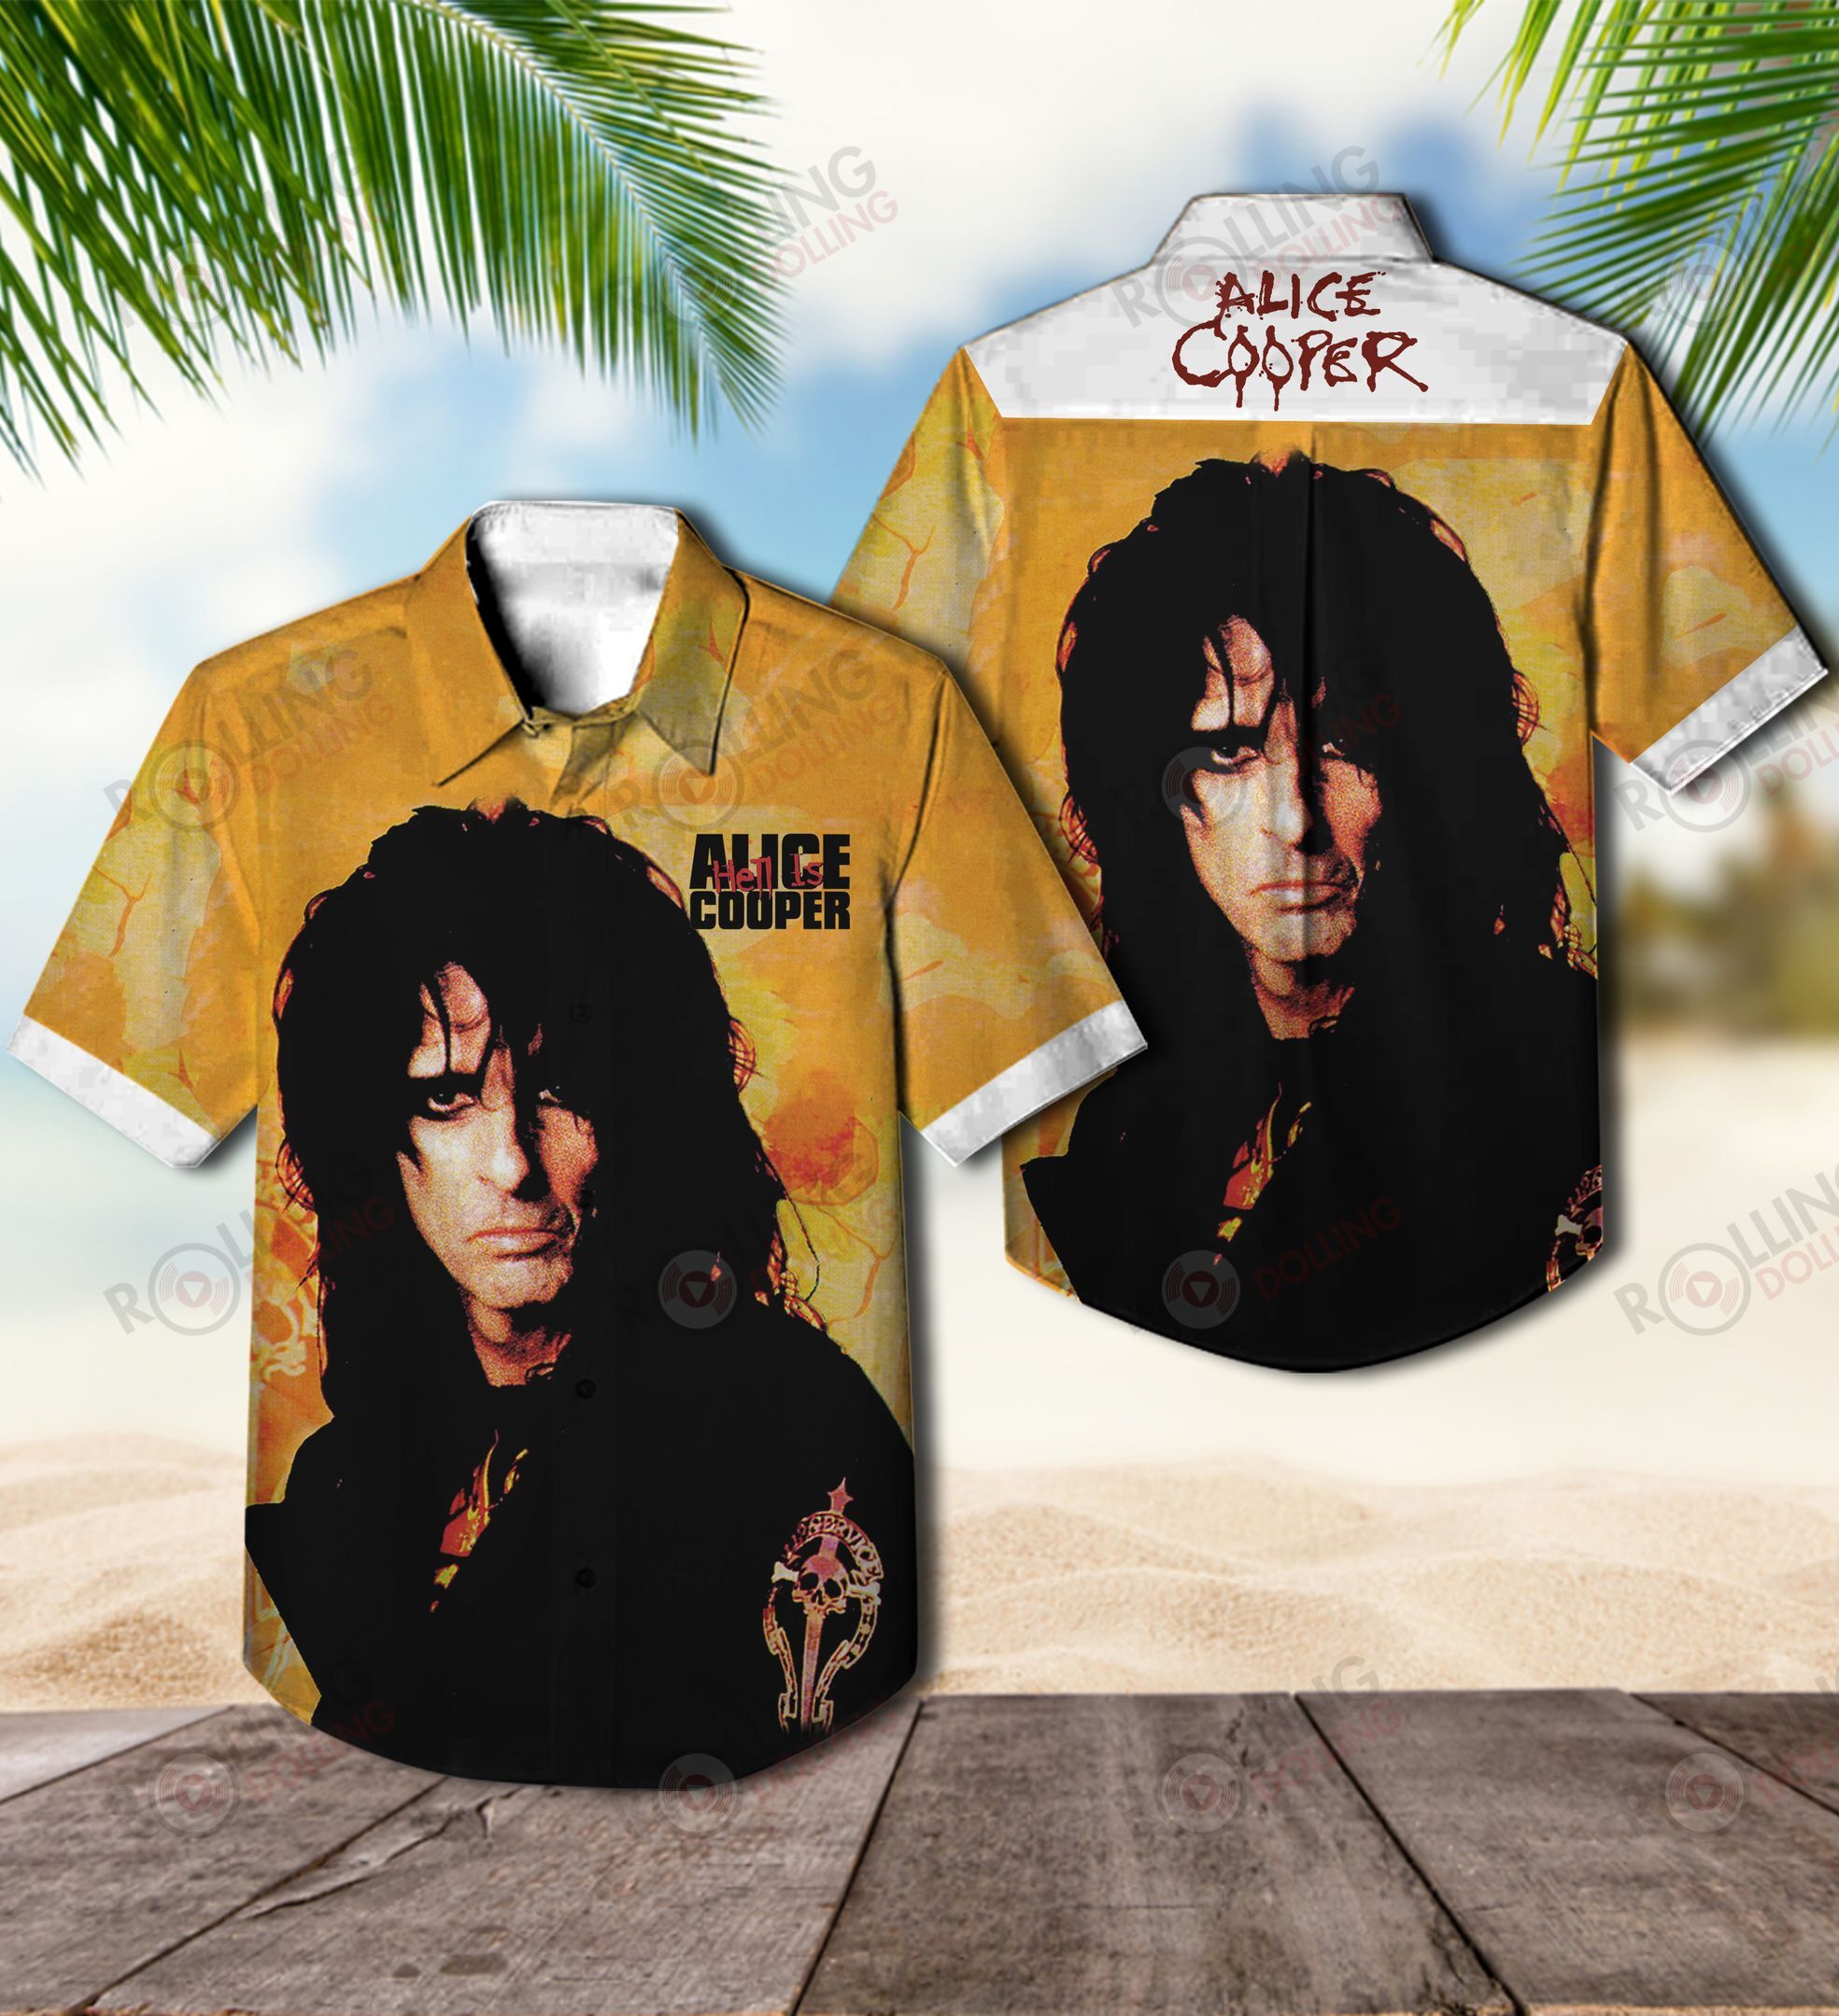 This would make a great gift for any fan who loves Hawaiian Shirt as well as Rock band 72